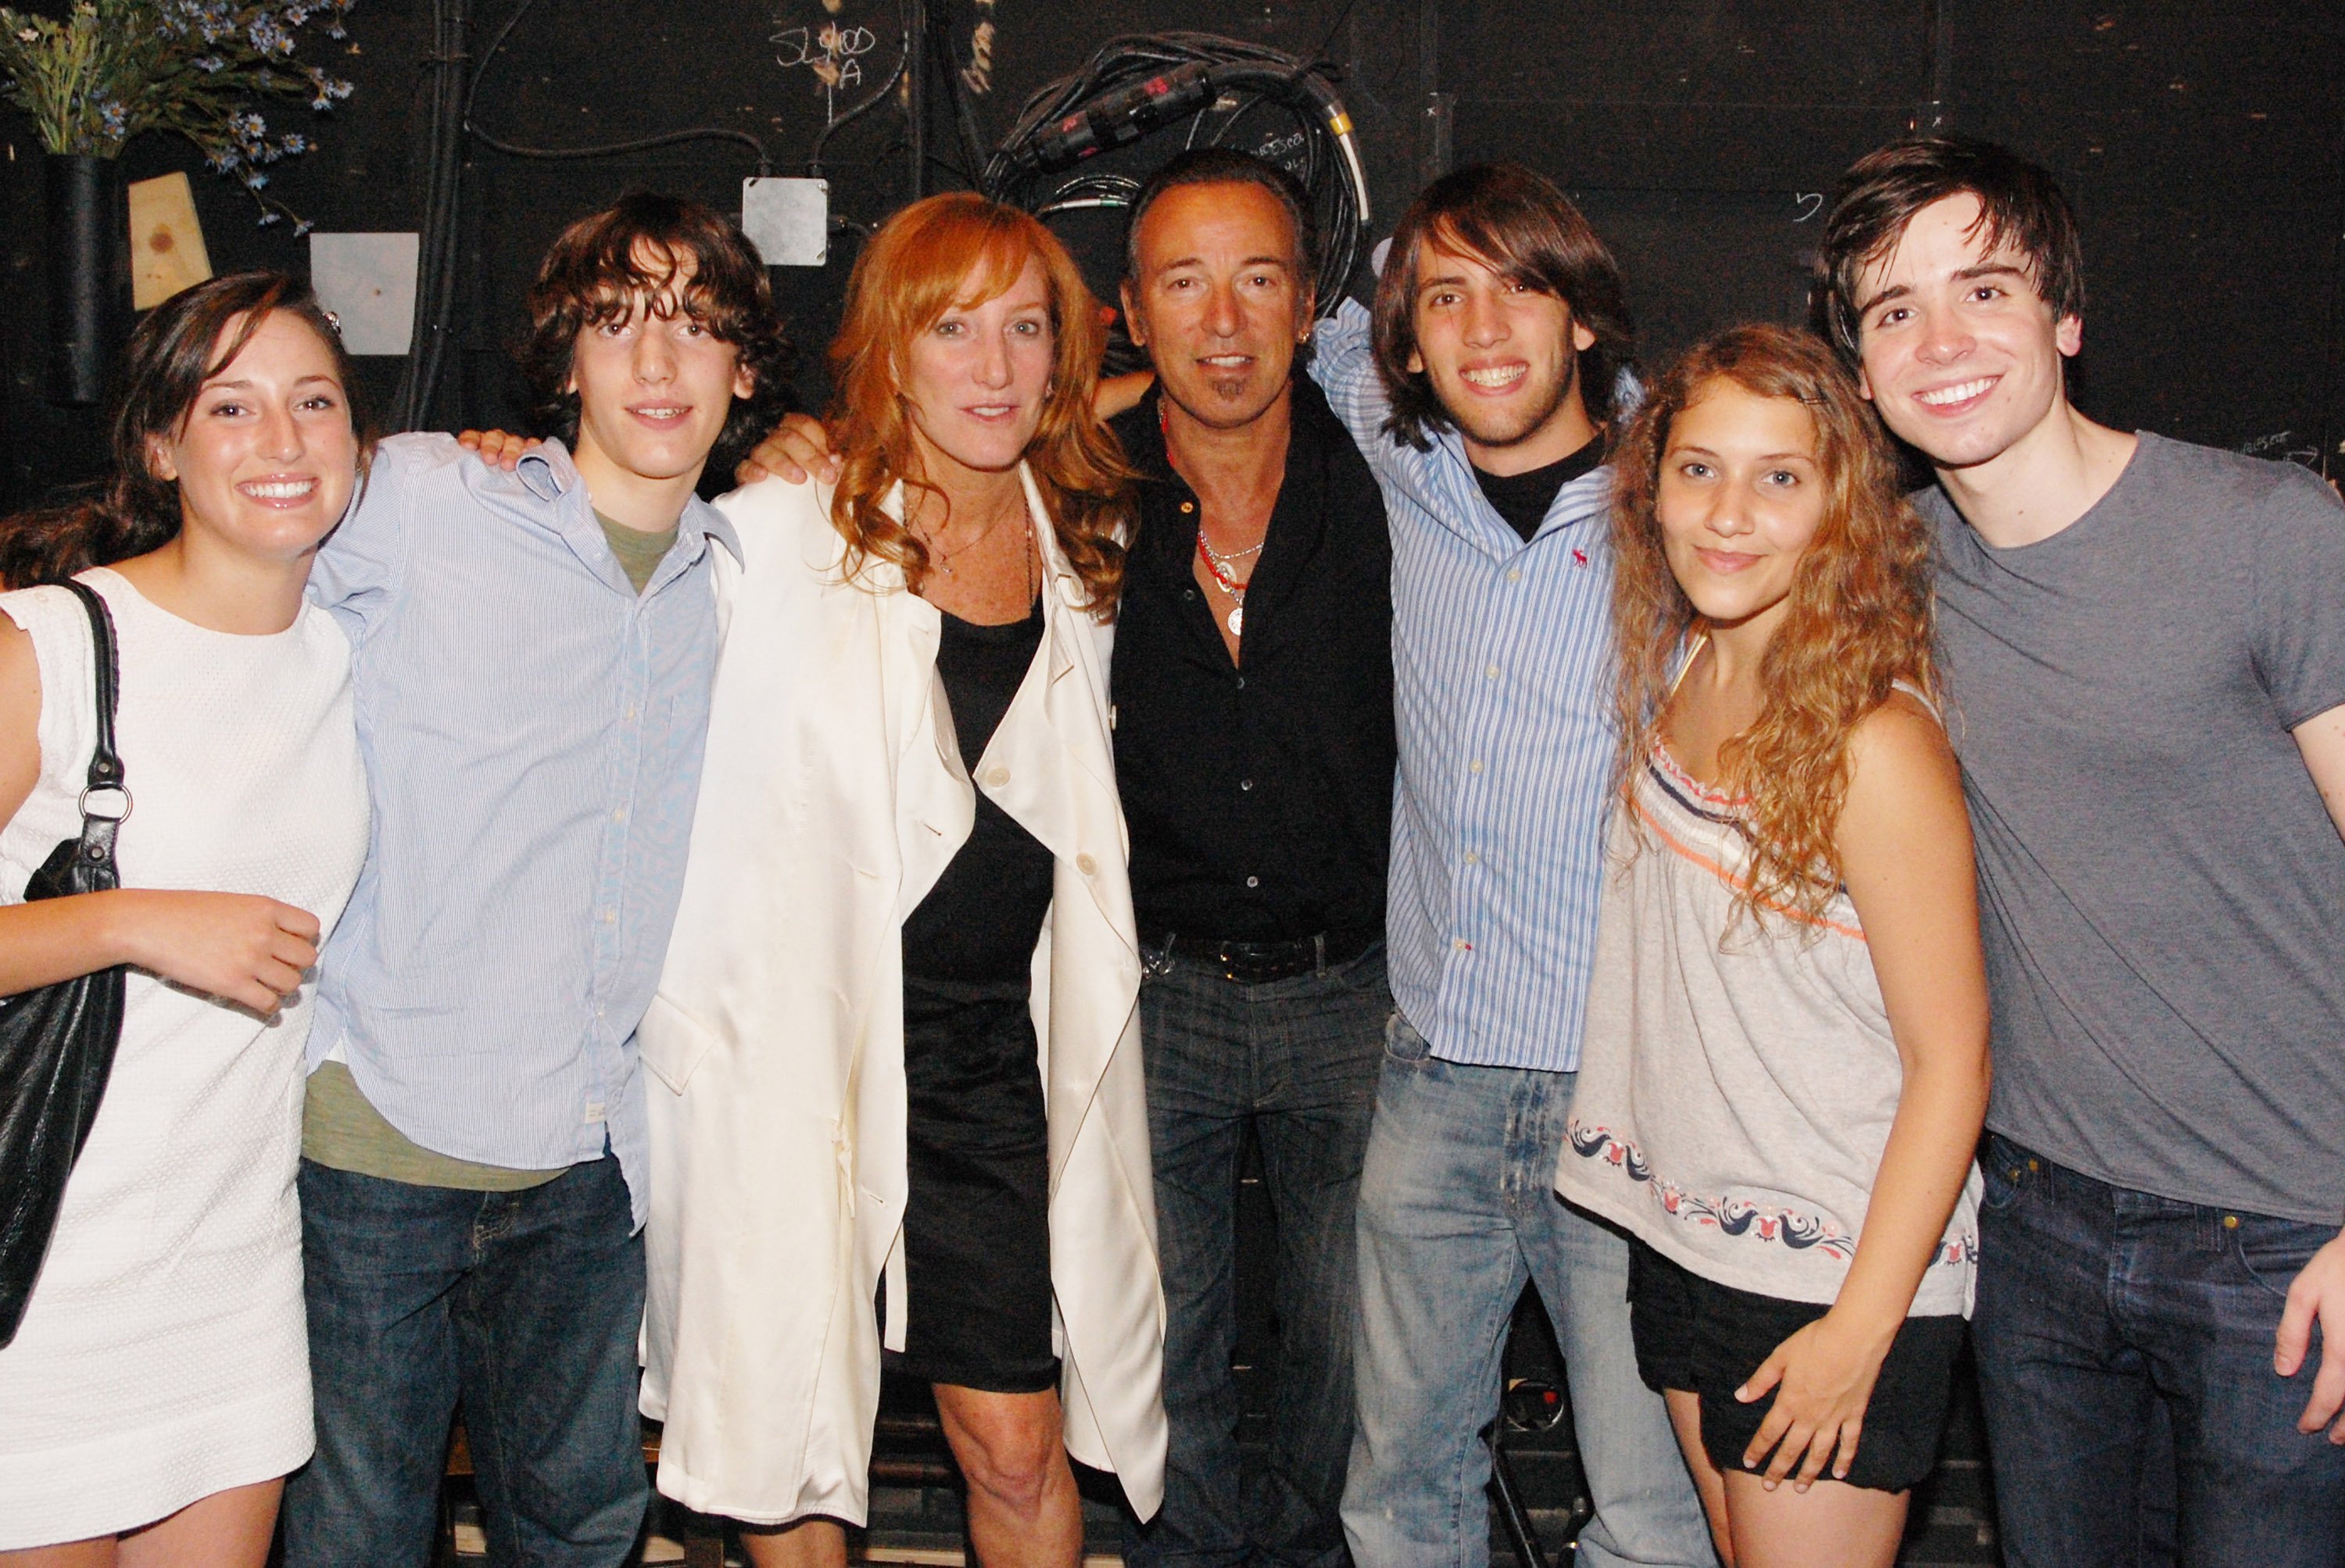 Jessica Rae Springsteen, Sam Ryan Springsteen, Patti Scialfa, Bruce Springsteen, Evan James Springsteen, and "Spring Awakening" actors Eryn Murman and Matt Doylebackstage at The Eugene O'Neill Theater in 2008 in New York City. | Source: Getty Images